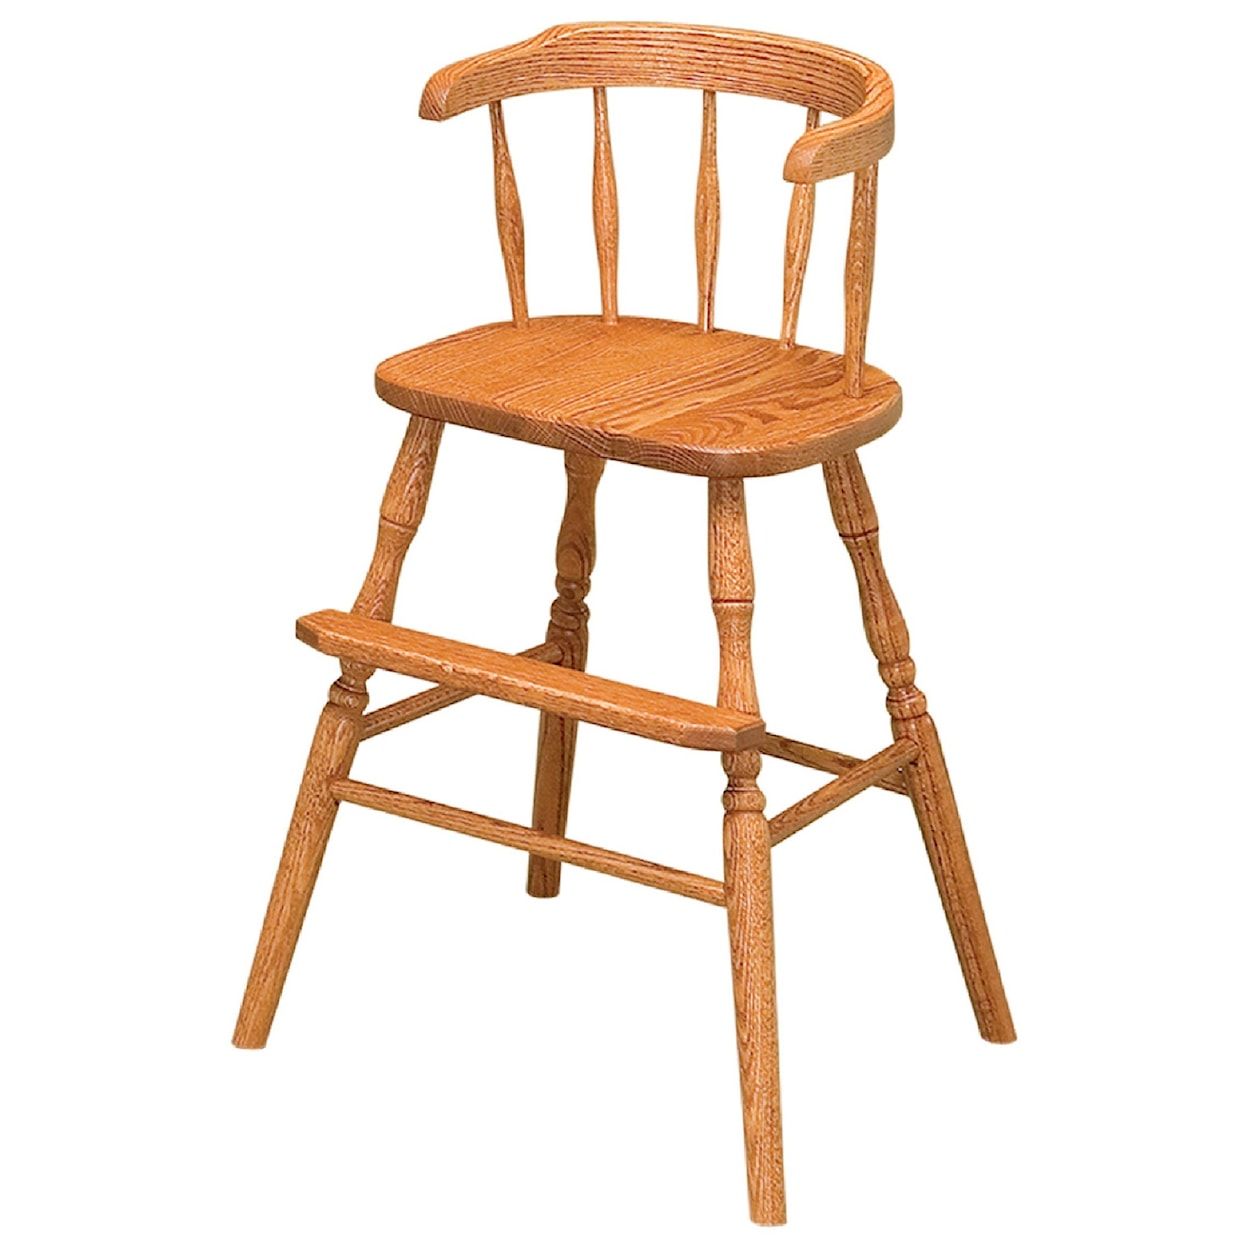 F&N Woodworking Wrap Around Youth Stationary Bar Stool - Wood Seat